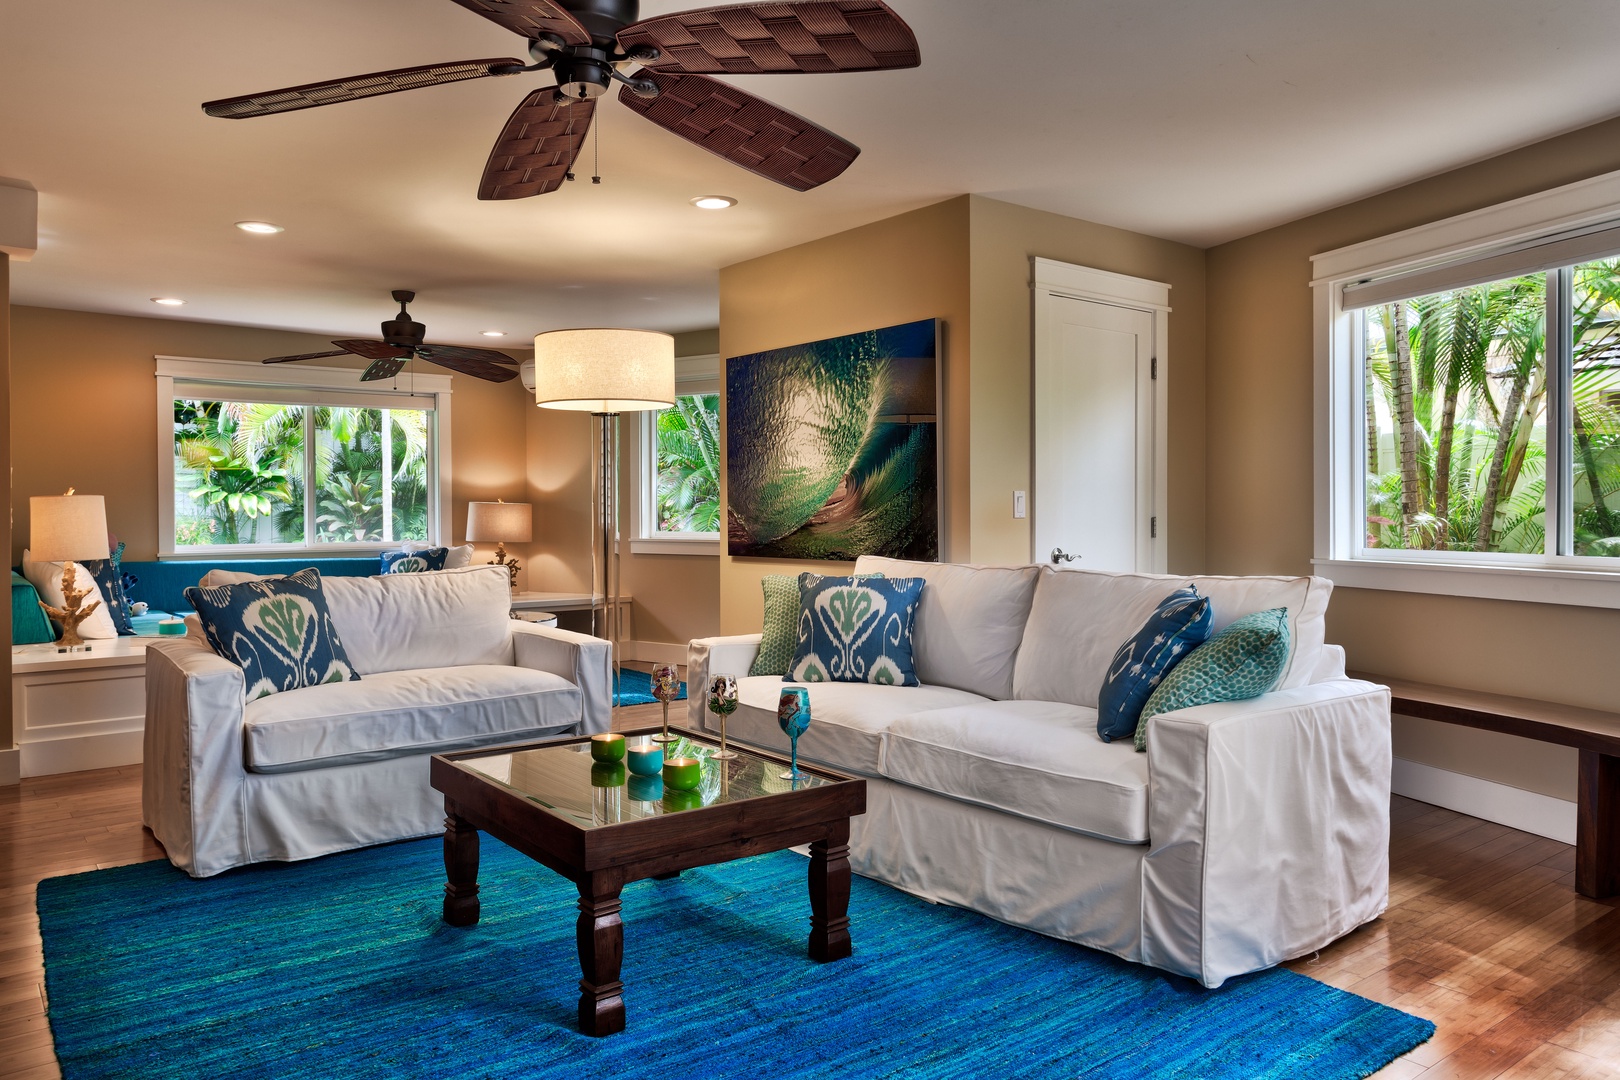 Kailua Vacation Rentals, Maluhia - Let the air flow and the ceiling fans refresh you while you sip a cocktail on the comfy couches